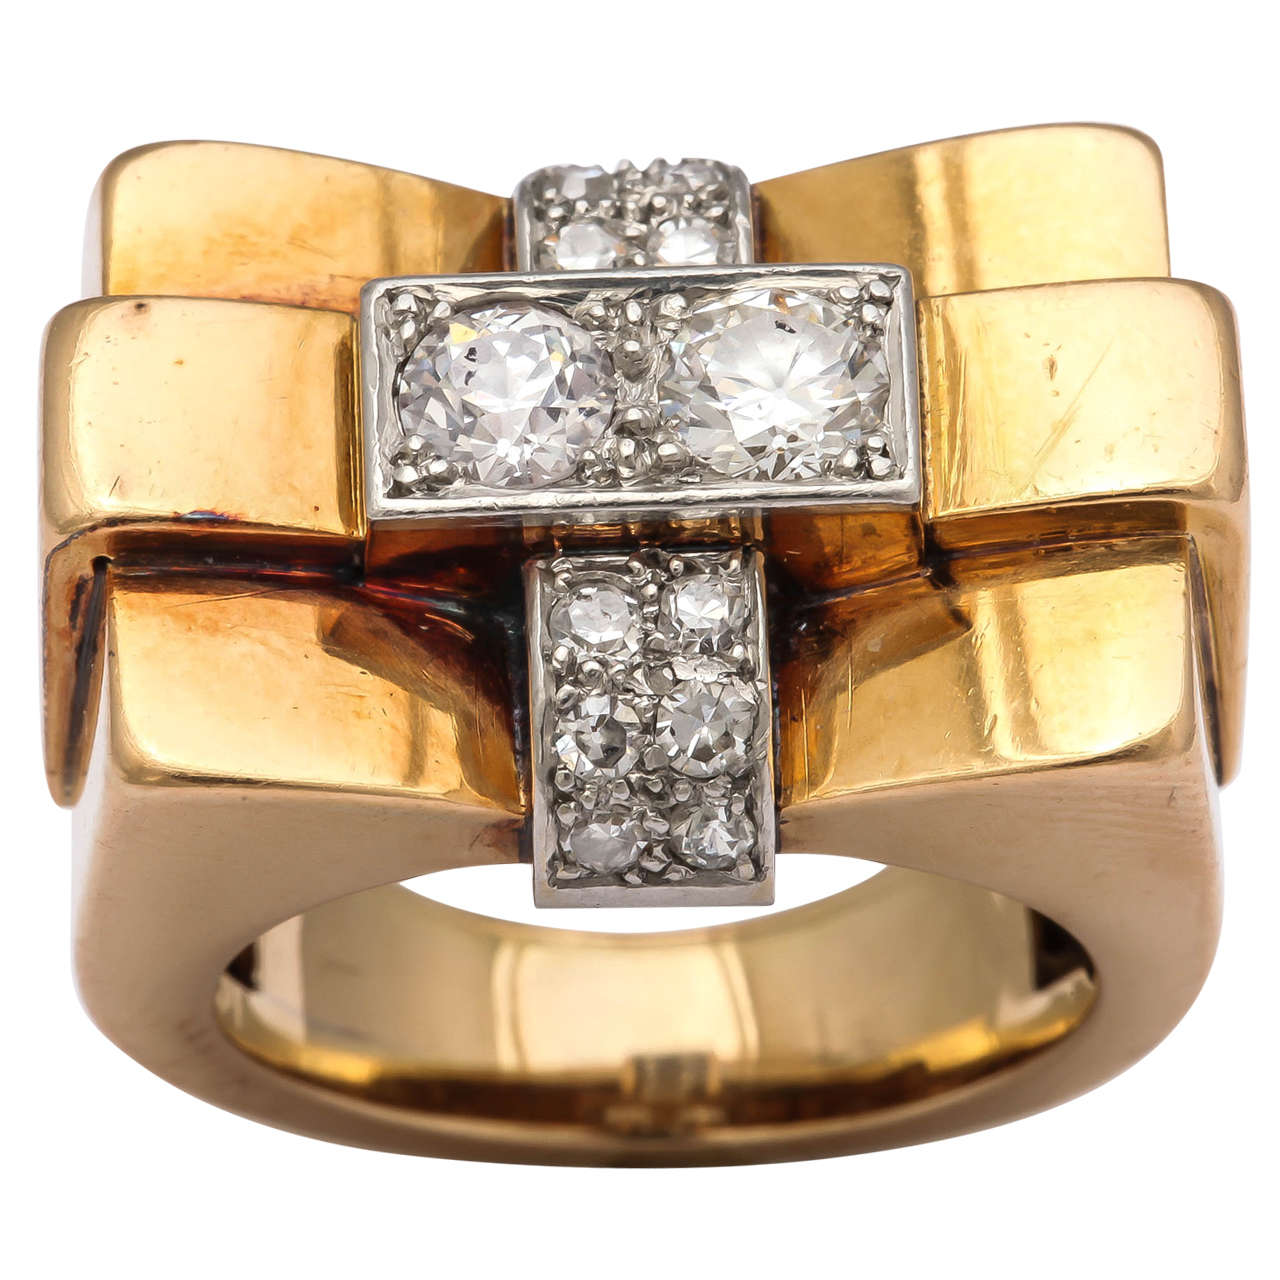 Of angular design, this bague pont or bridge ring from the 40s is set with two central diamonds flanked by six small diamonds on each side forming a cruciform, in platinum and 18k gold. 

French, 1940s, with French control mark

Size 6 1/4. Top